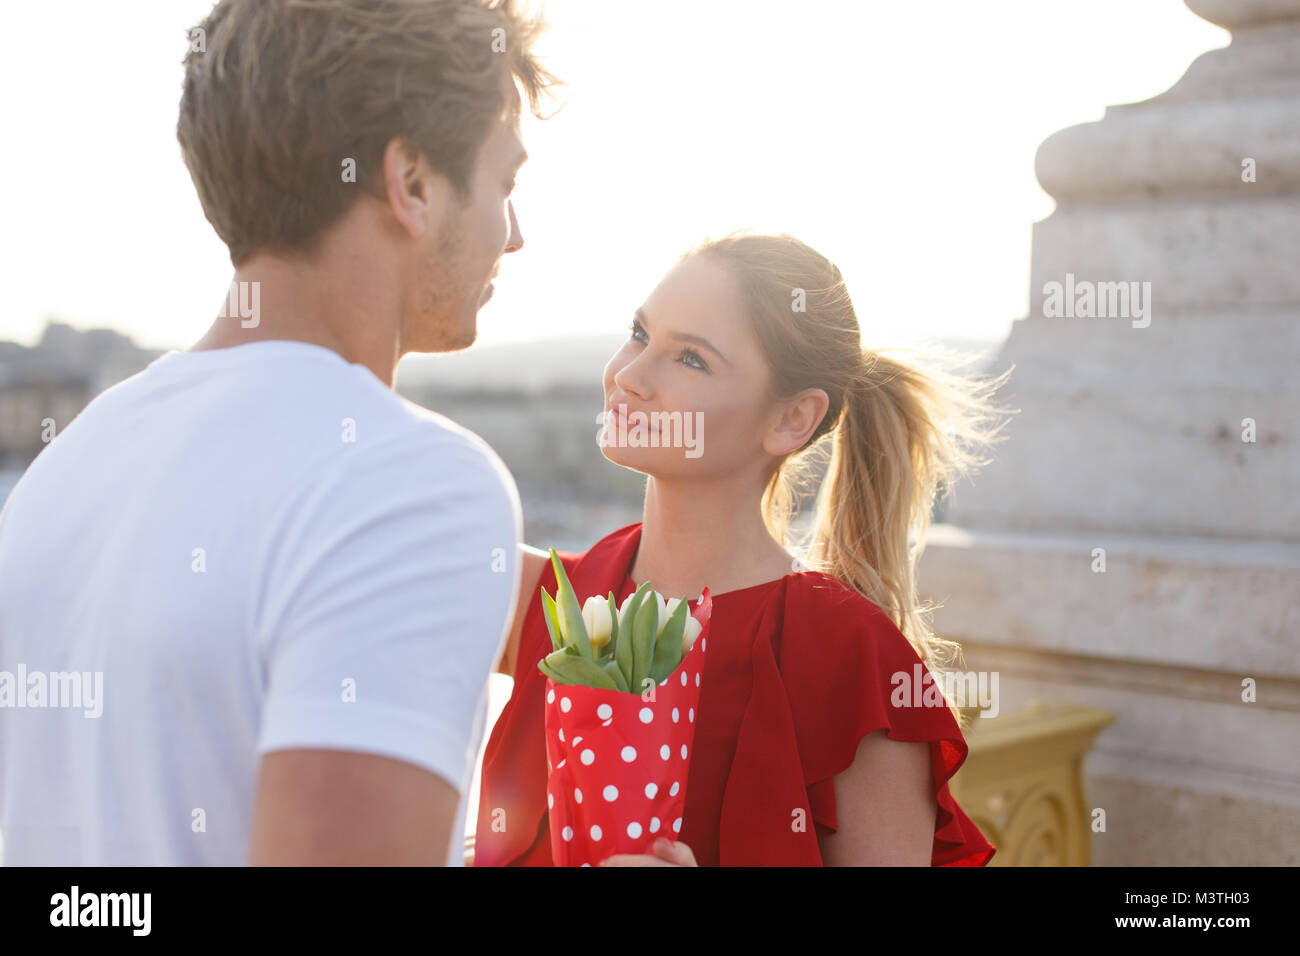 Coppia giovane dating at srping outdoor, donna con bouquet Foto Stock